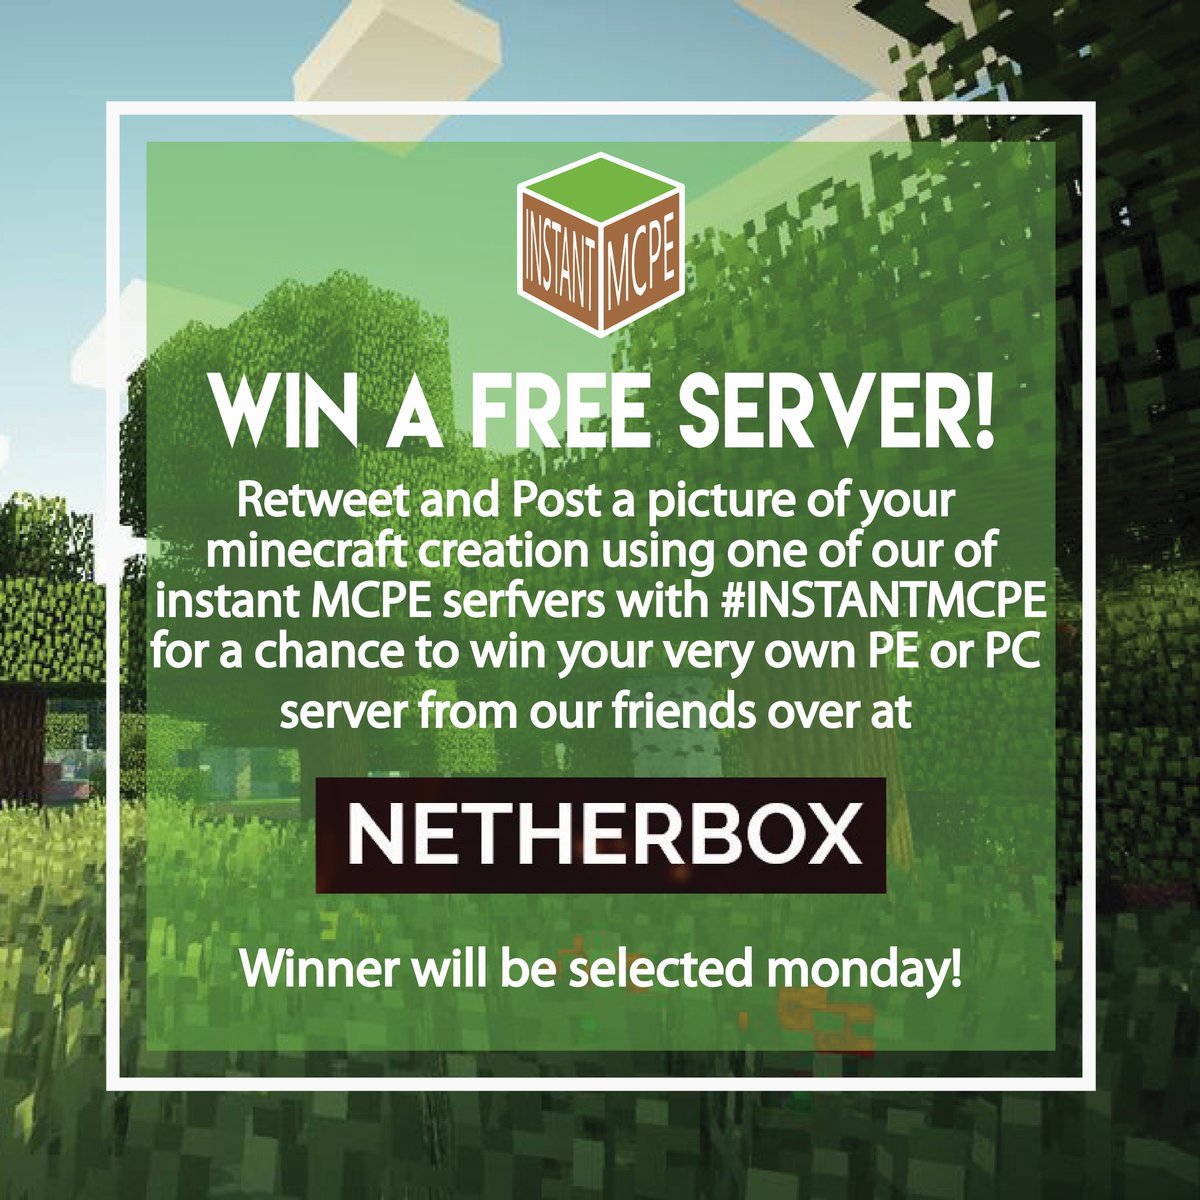 Instant Mcpe Get The Weekend Started Off Right Lets See What You Guys Can Build Instantmcpe Netherbox T Co Bfcw0ewrdr